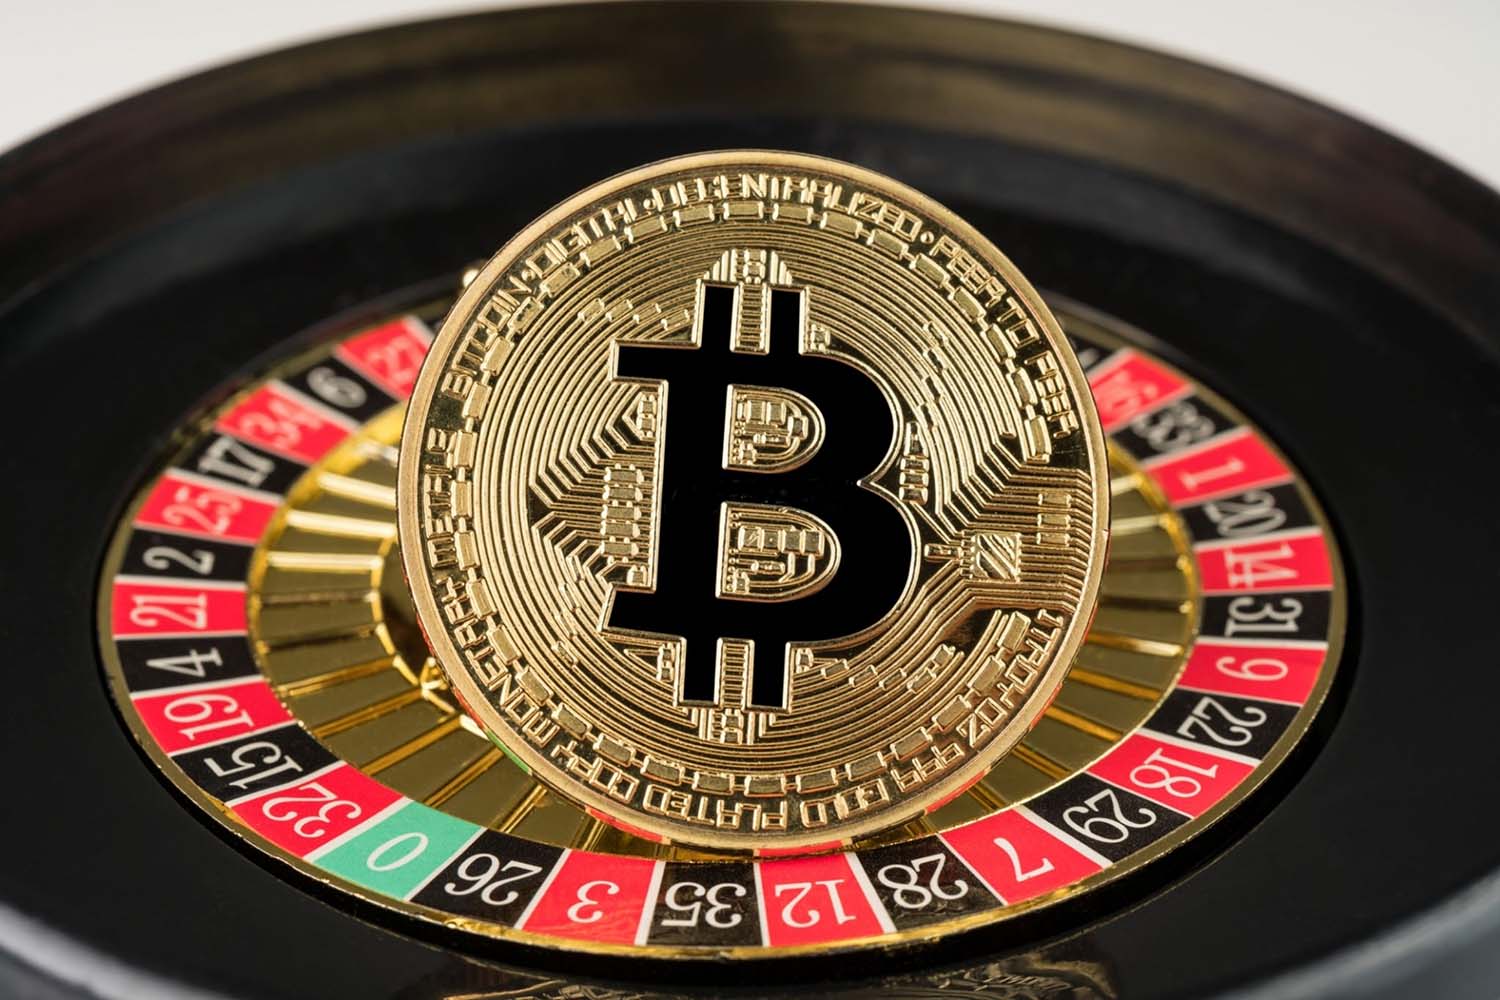 OMG! The Best top bitcoin casinos Ever!